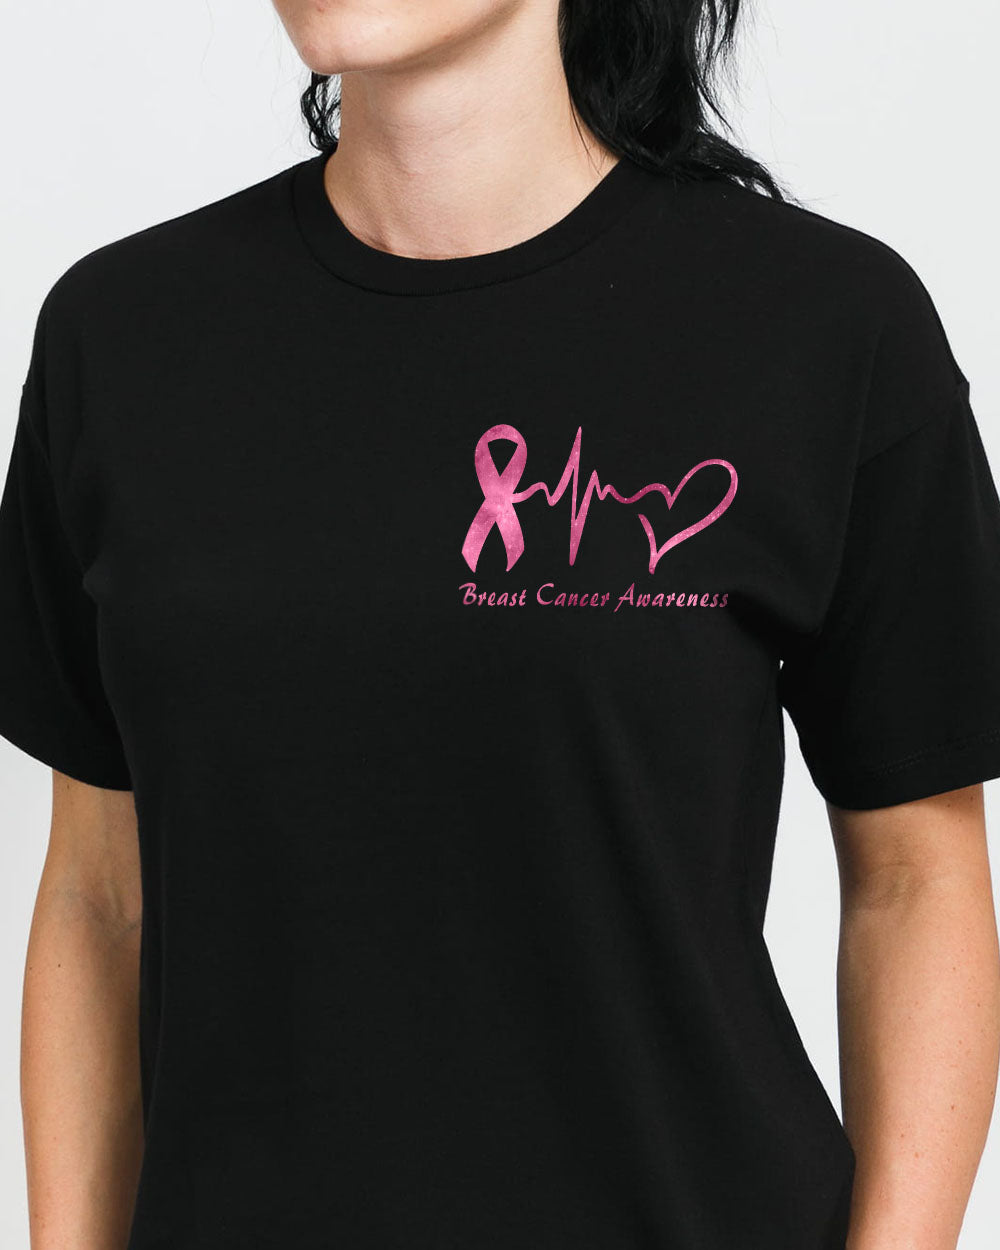 They Whispered To Her You Cannot Withstand The Storm Half Wing Ribbon Women's Breast Cancer Awareness Tshirt